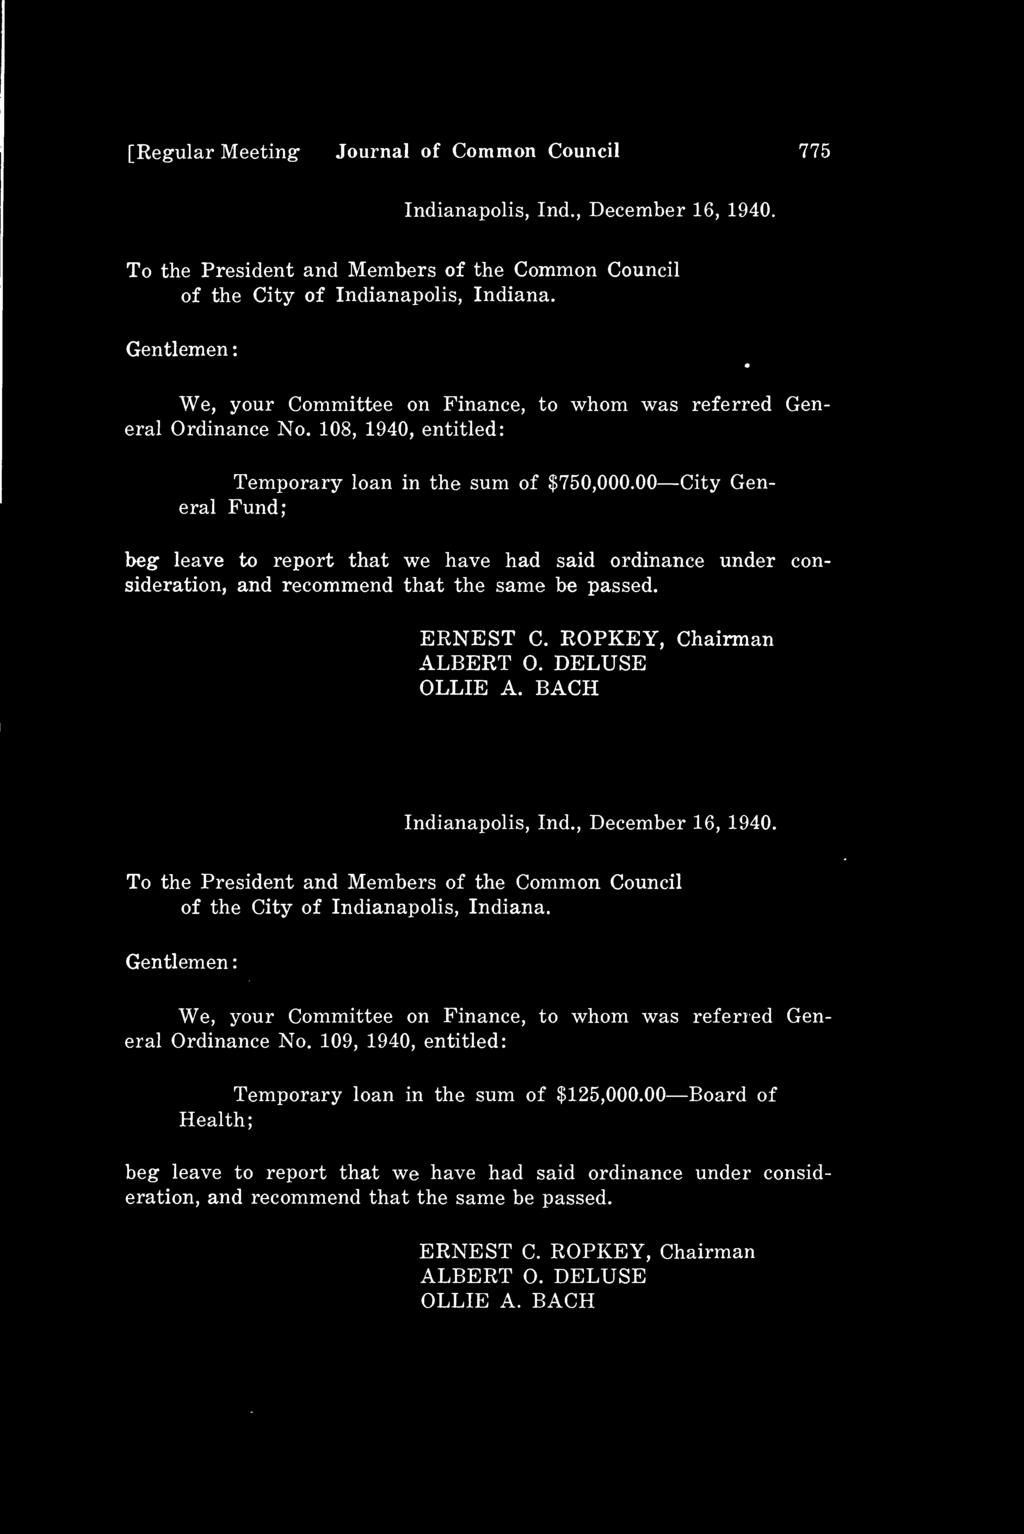 [Regular Meeting- Journal of Common Council 775 Indianapolis, Ind., December 16, 1940. To the President and Members of the Common Council of the City of Indianapolis, Indiana.